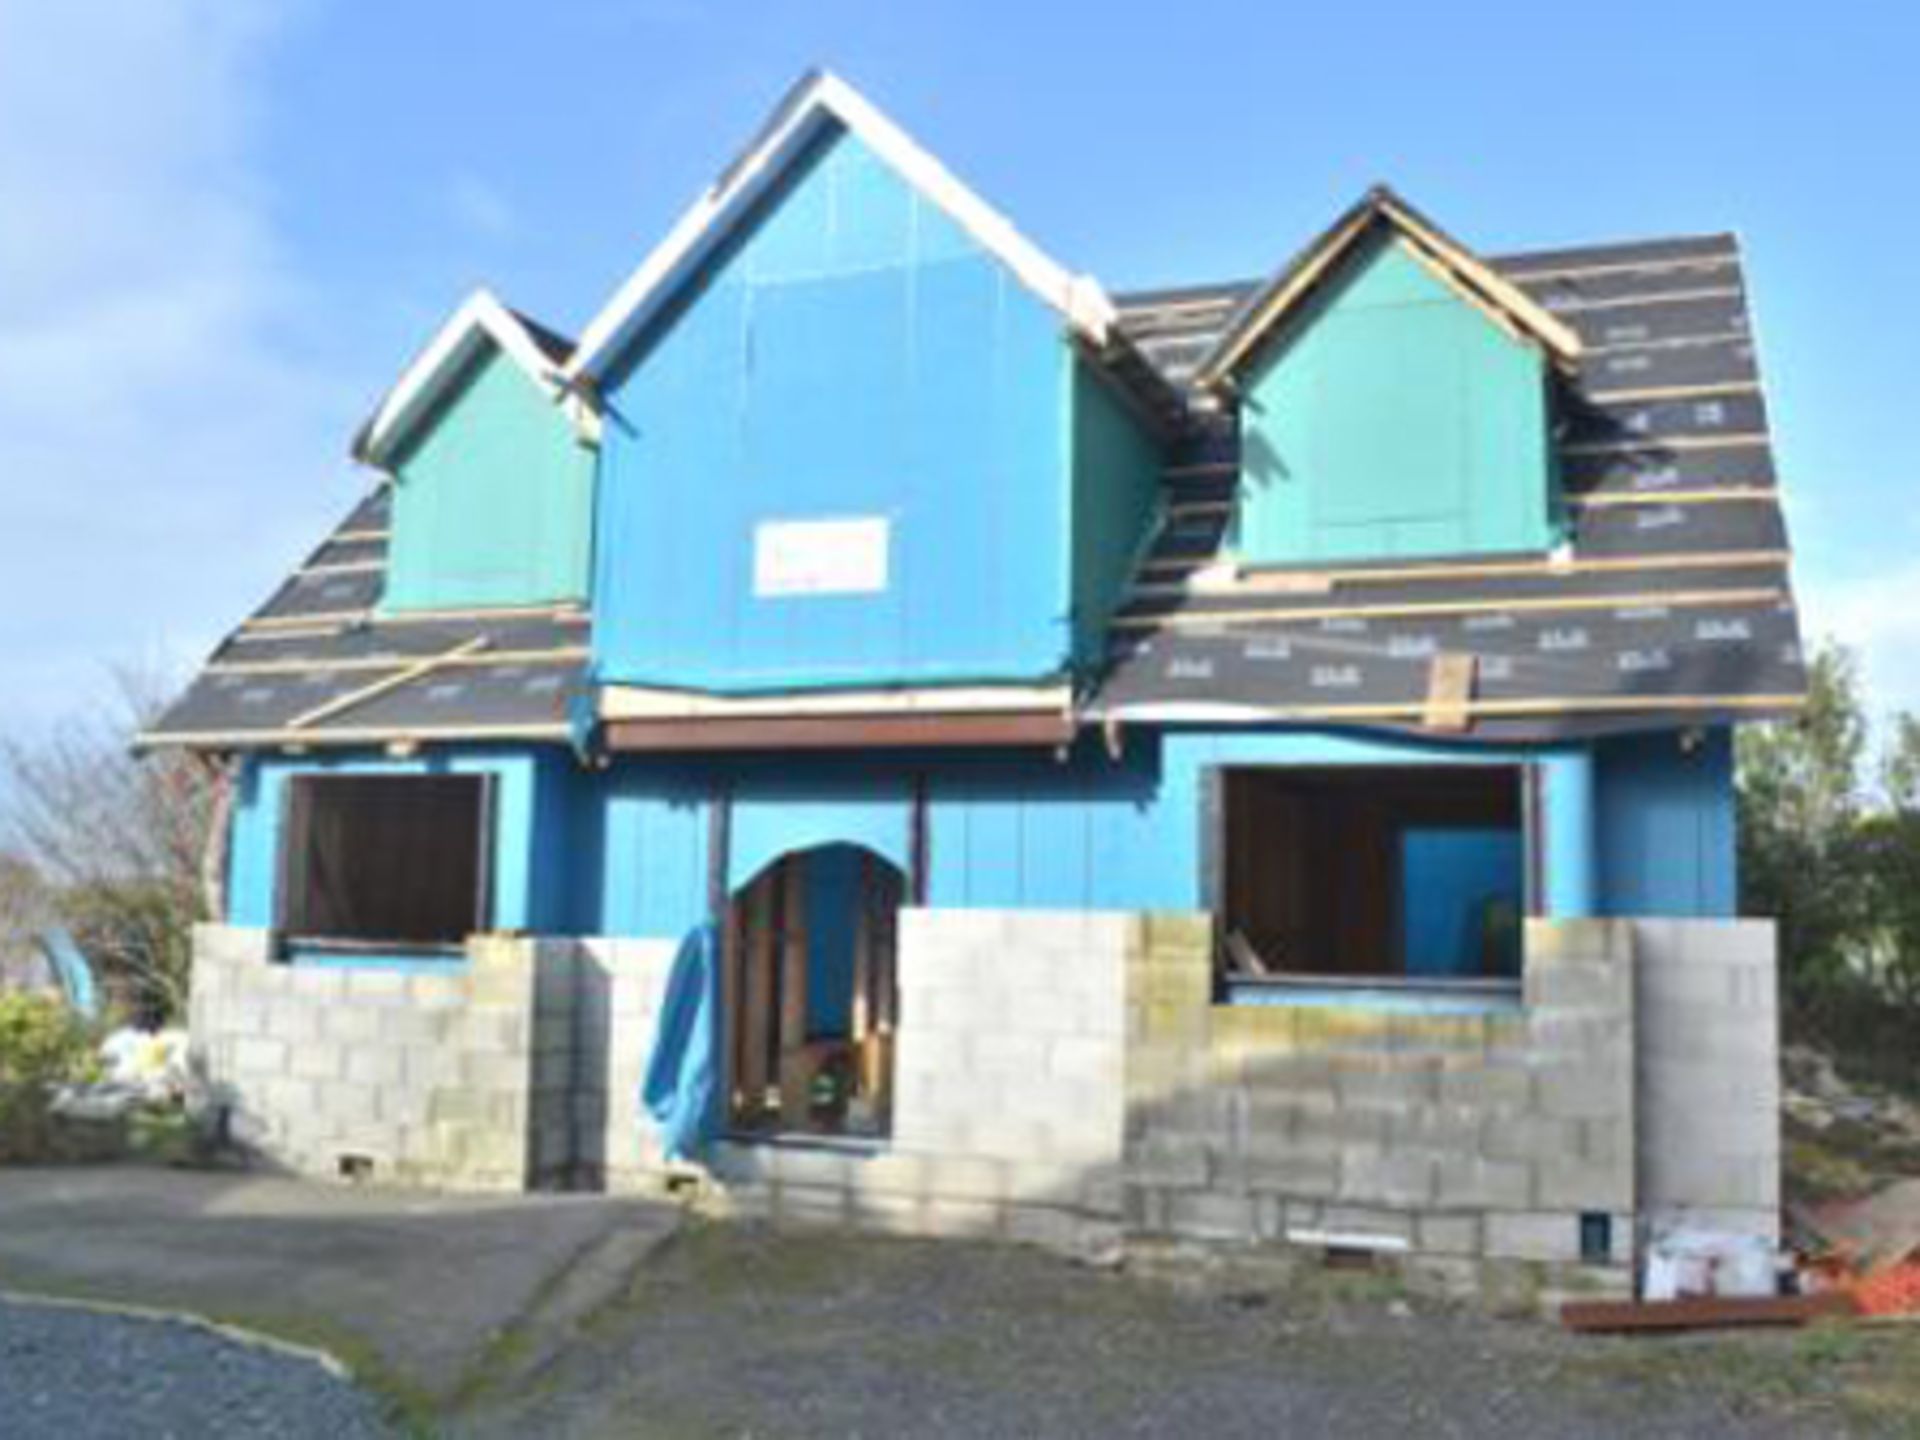 CORNWALL - PARTLY CONSTRUCTED DETACHED HOUSE FOR COMPLETION